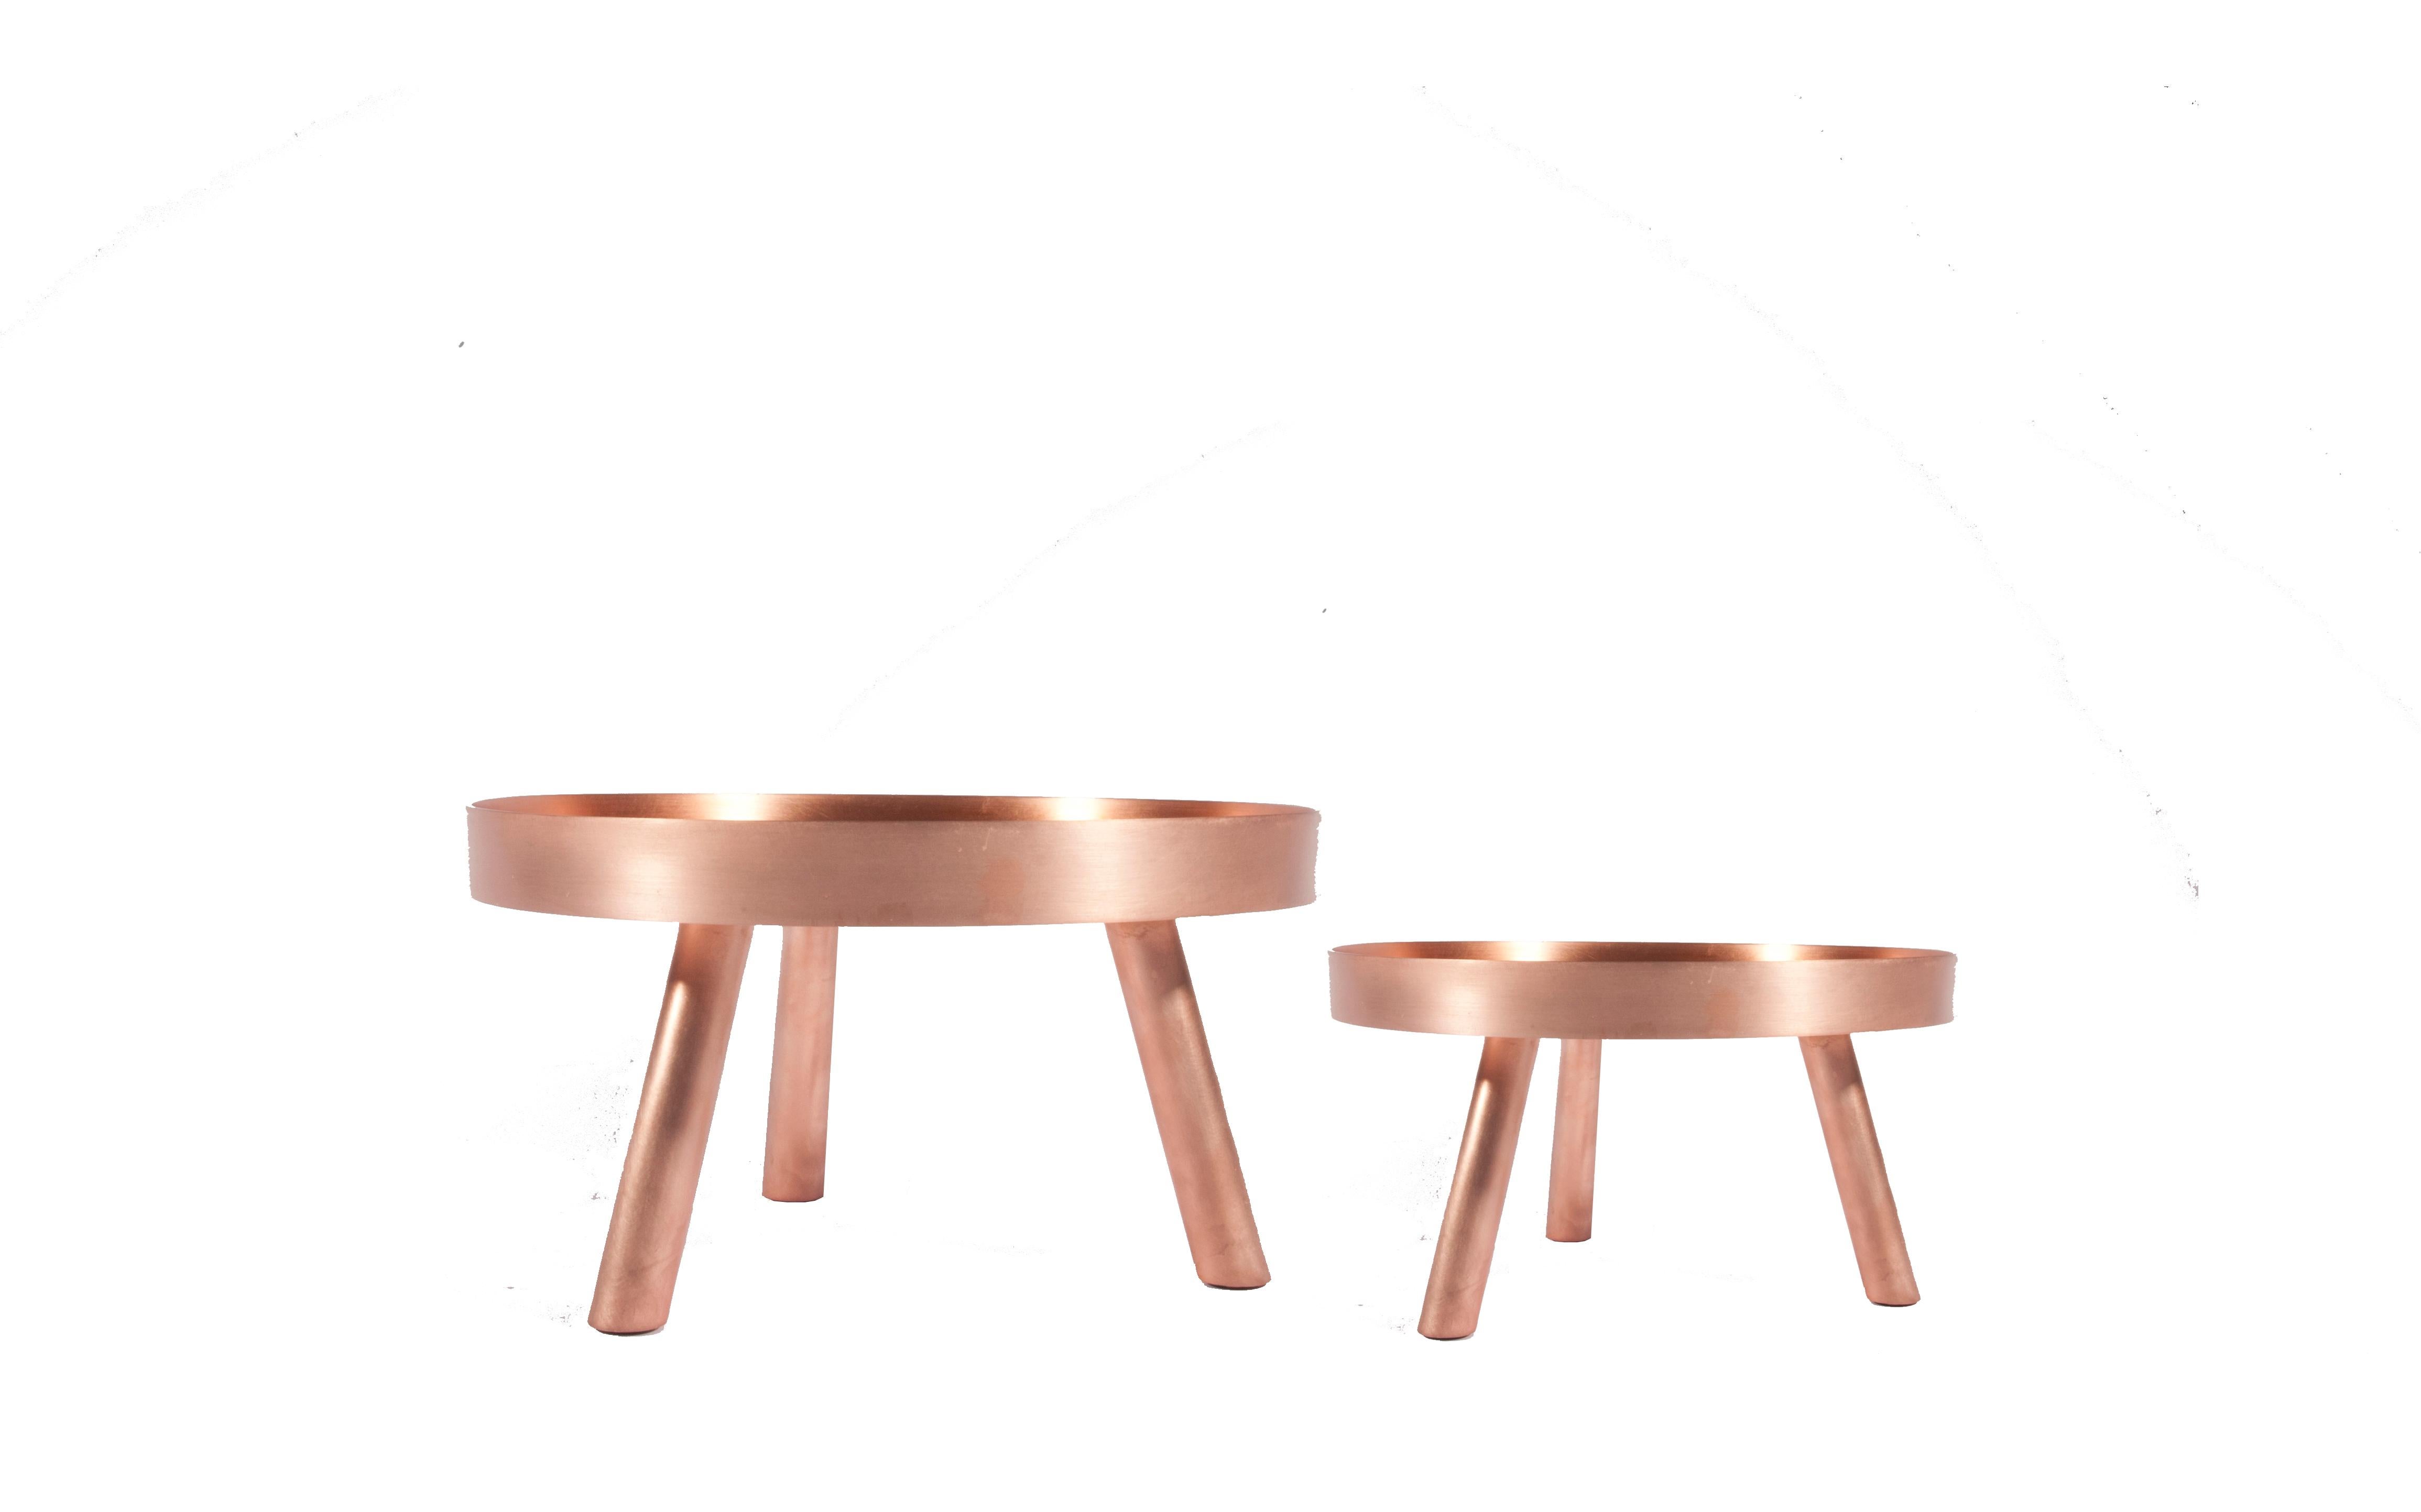 Lift and lift, too - set of two.
Simple. Elegant. Minimalist. The contemporary copper serving trays titled Lift collection will redefine the landscape of your table setting. Inspired by the Pantheon in Rome with its powerful oculus and strong